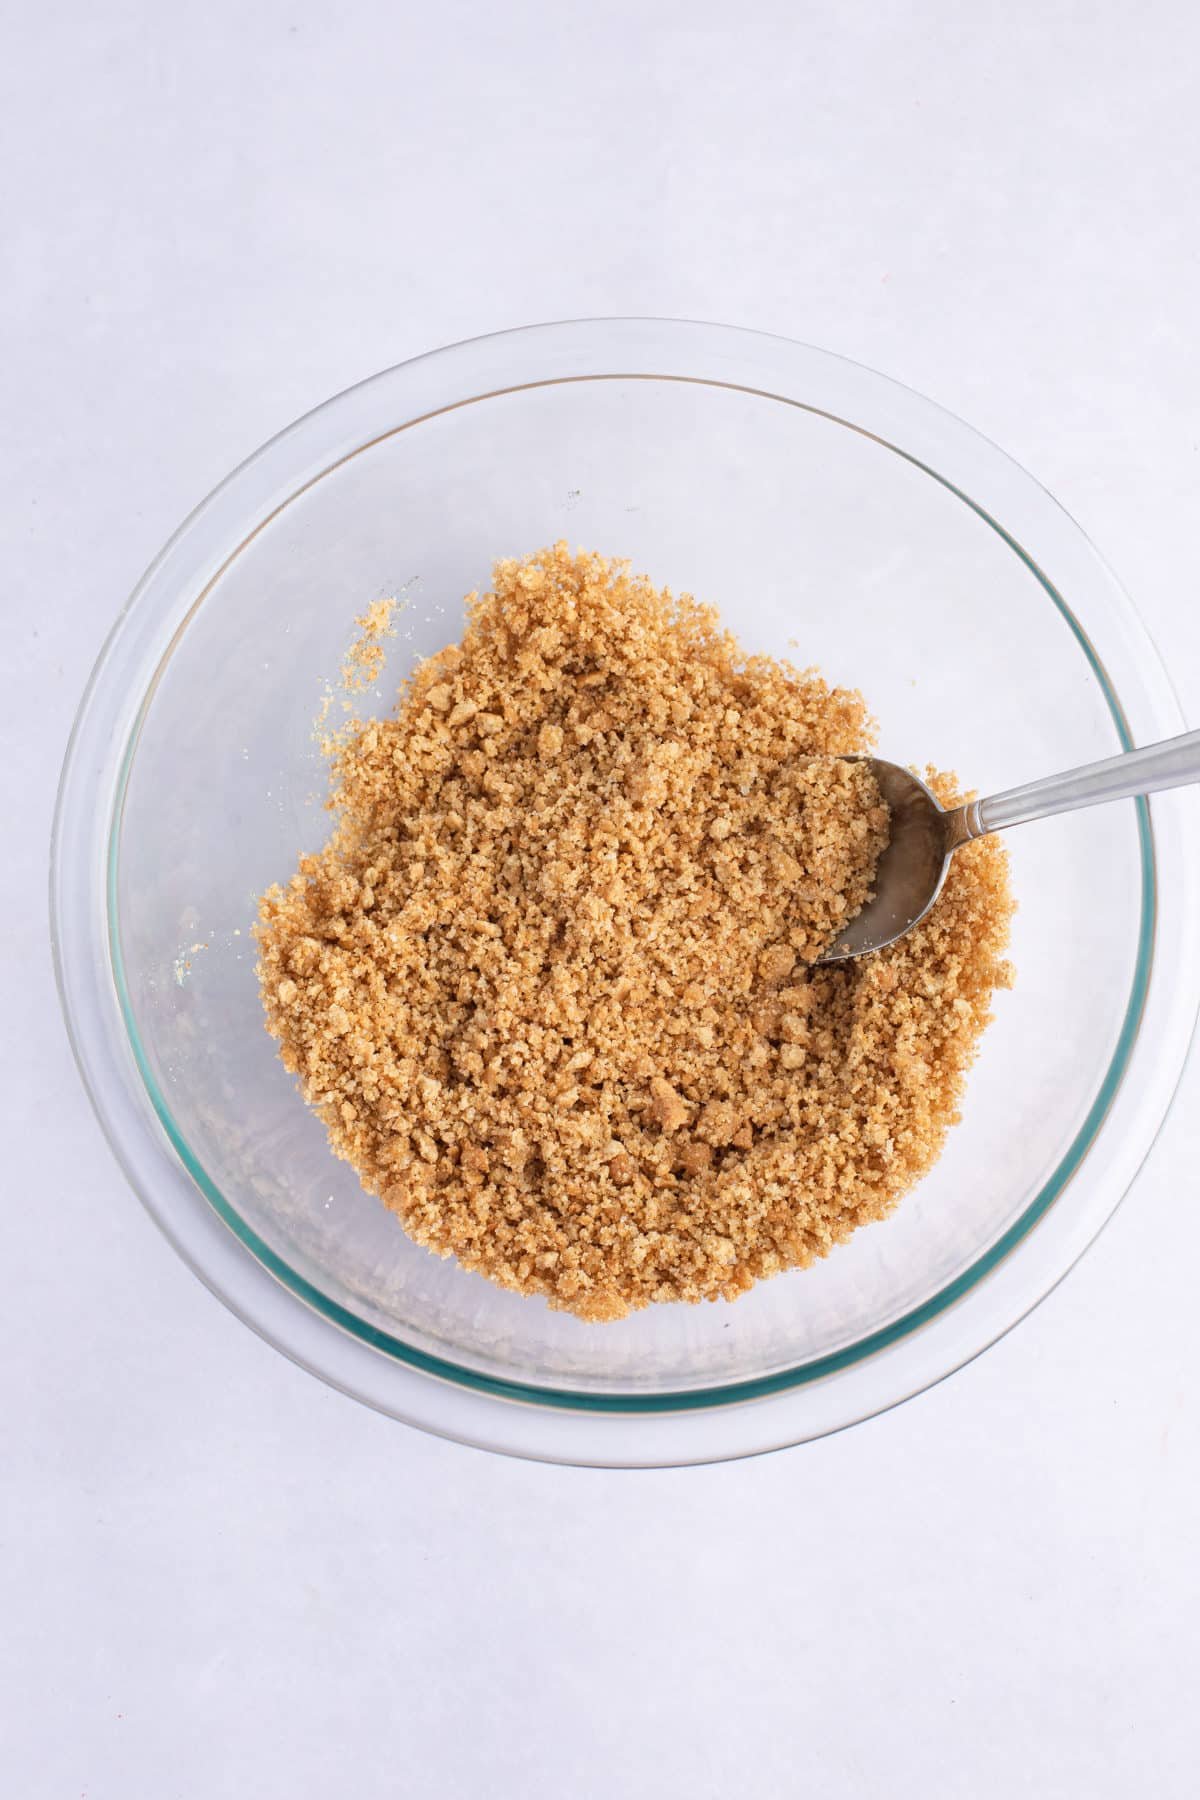 graham cracker crust mixture in a small glass bowl